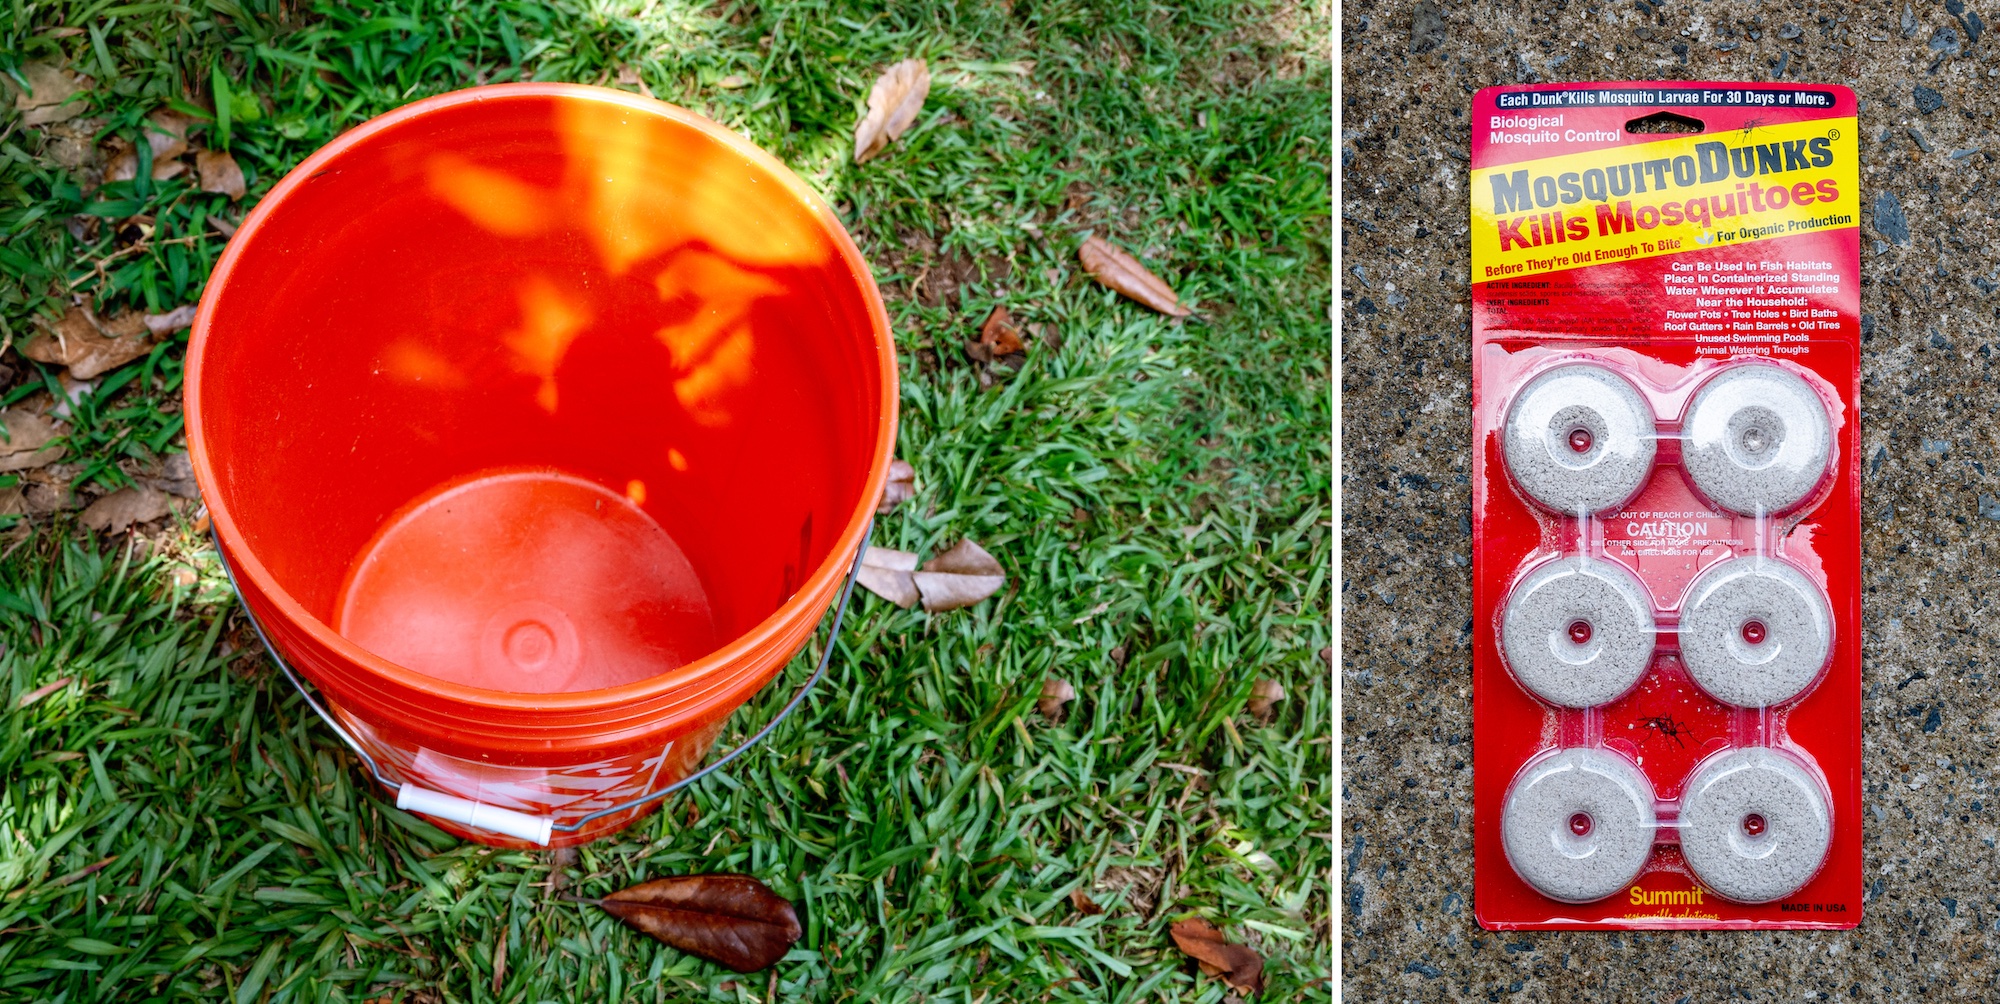 two images: one of an empty bucket on the grass, the other of a pack of mosquito dunks 